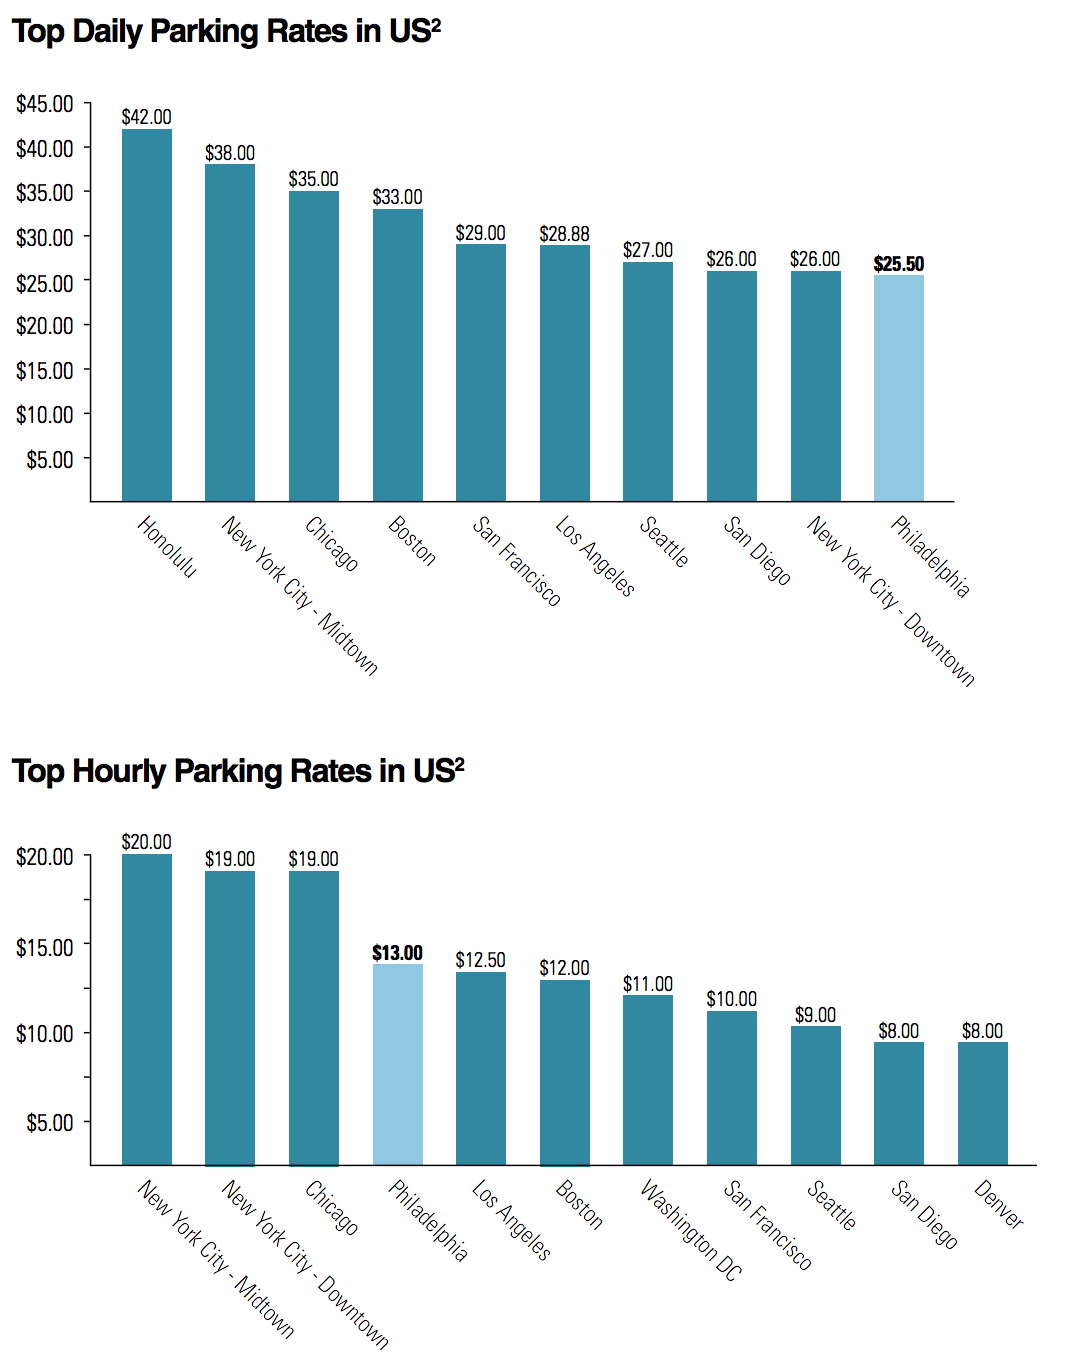 Top Daily Parking Rates vs. Hourly Parking Rates